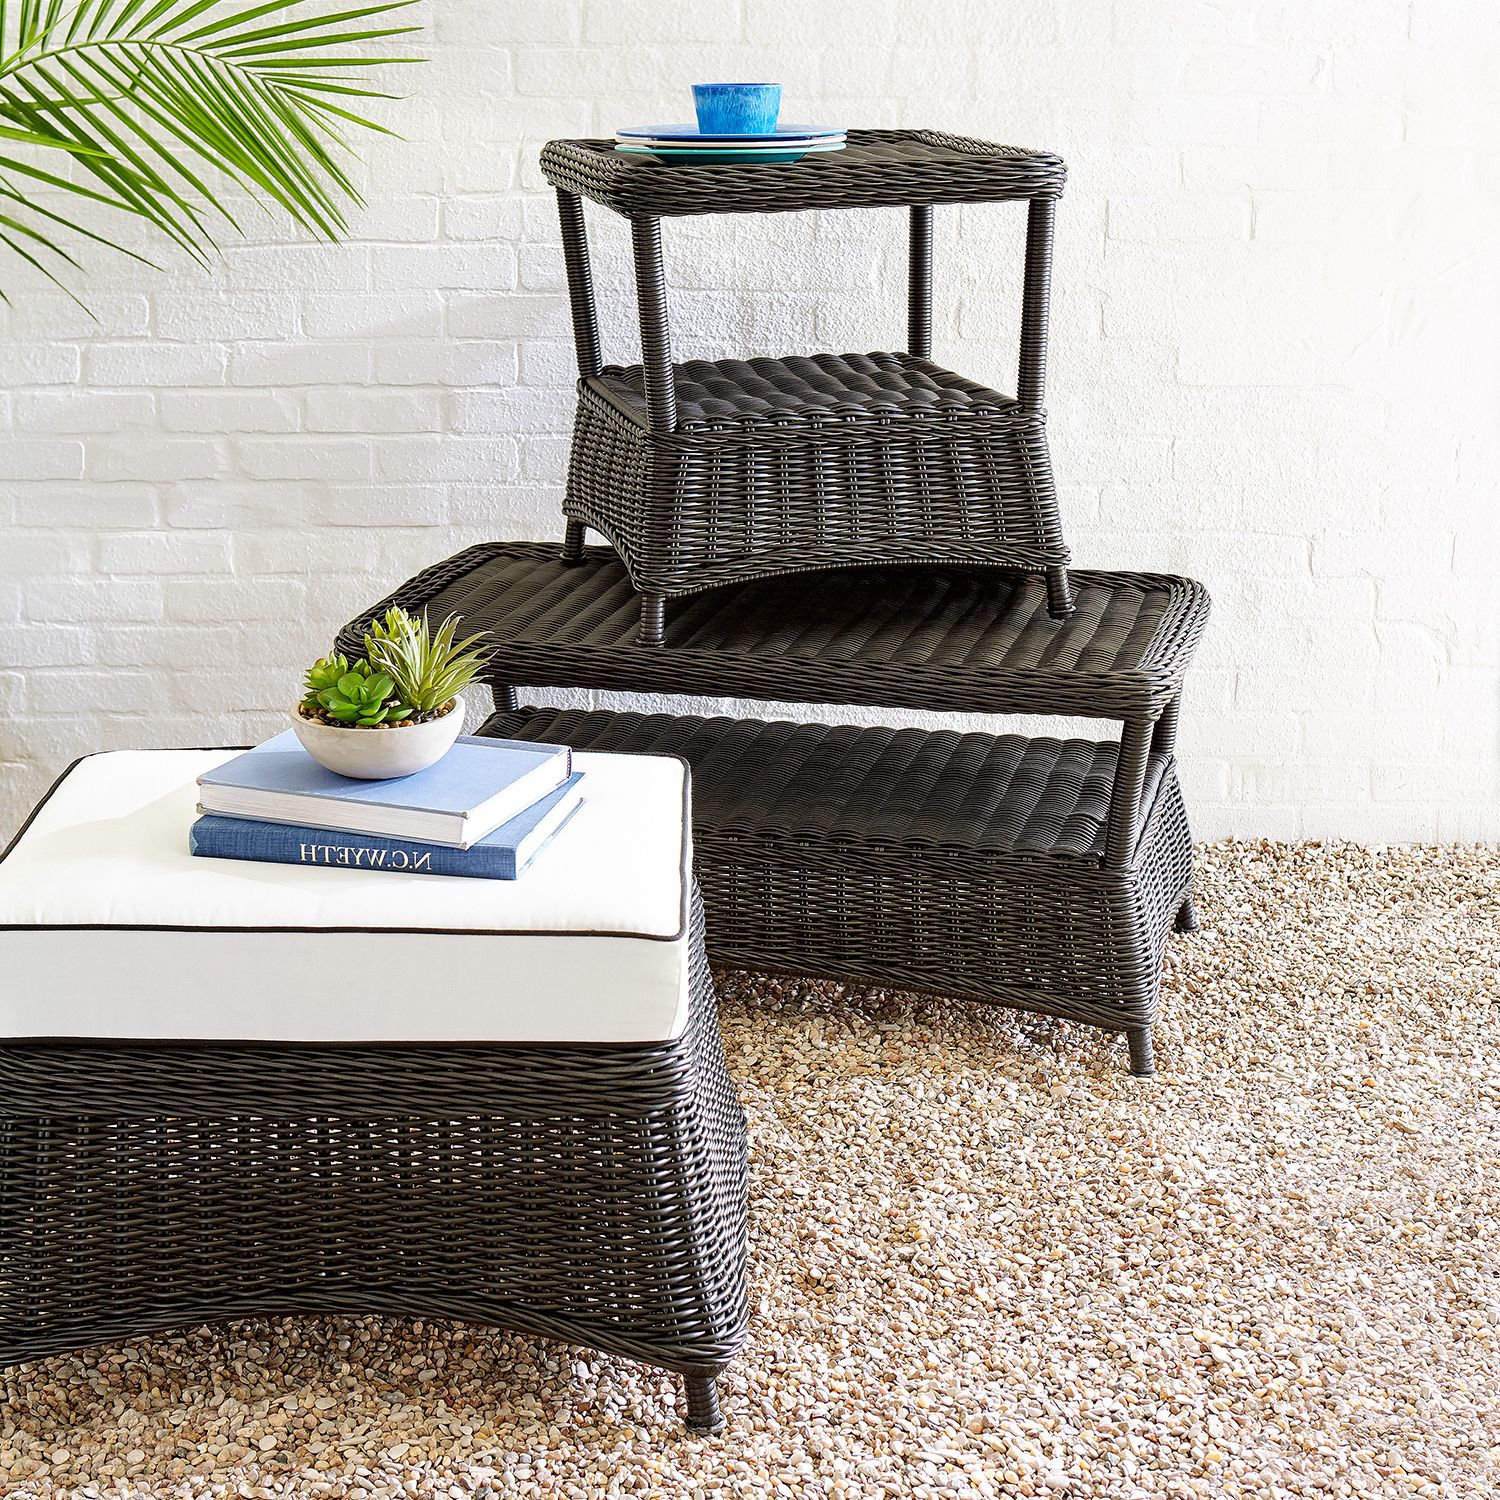 Well Known Wicker Coffee Tables Throughout Black Wicker Coffee Table – Pier (View 4 of 20)